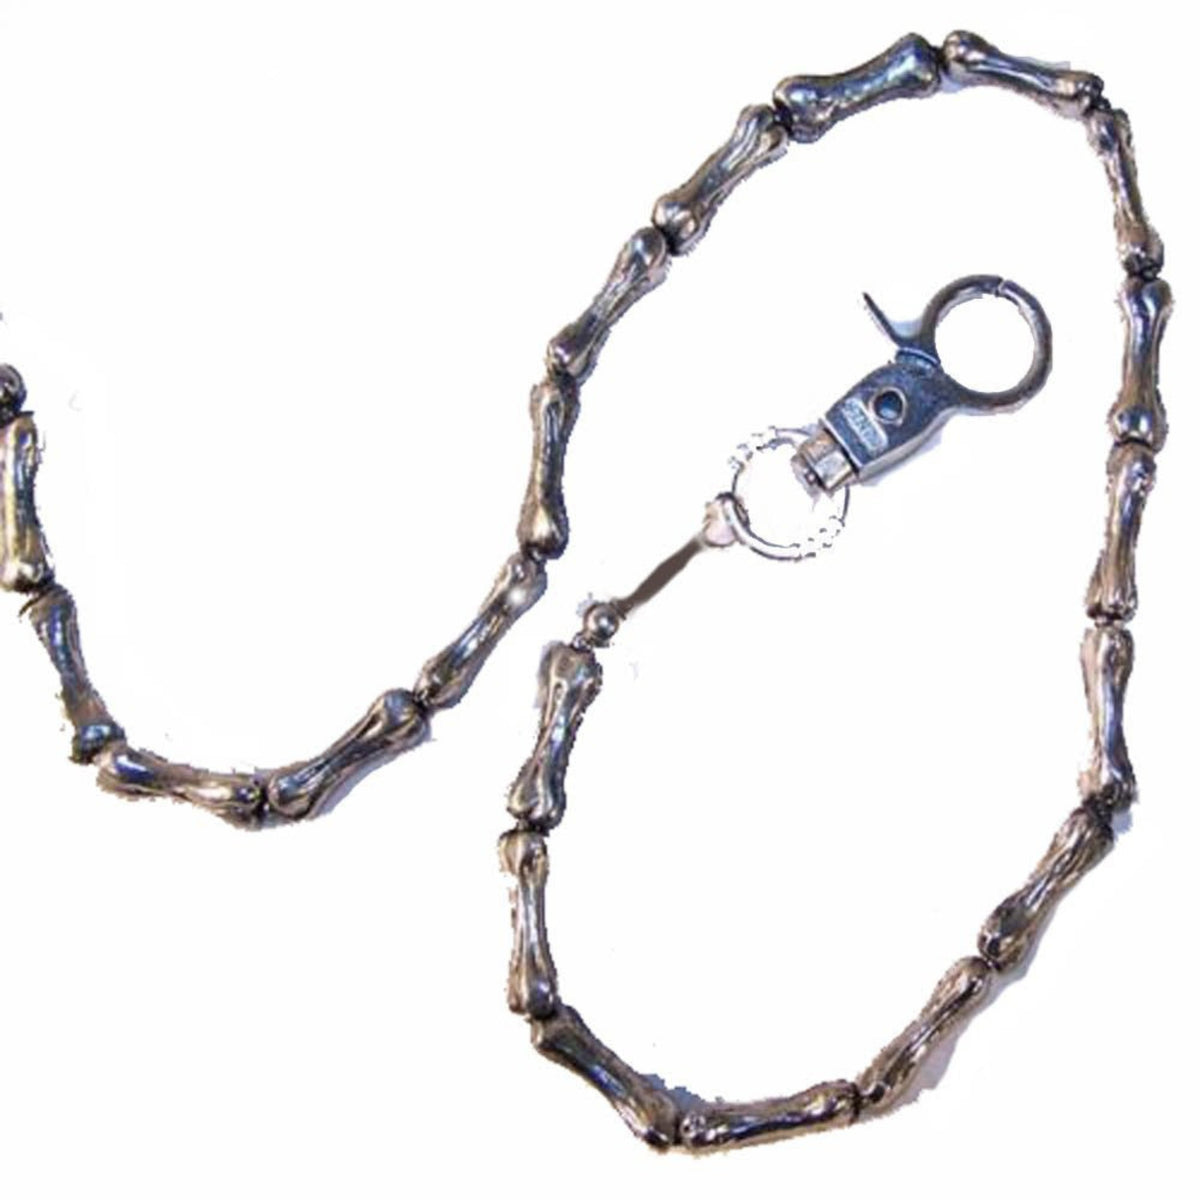 Heavy Linked Bones Metal 29-Inch Chain with Clip - (Set of 3)